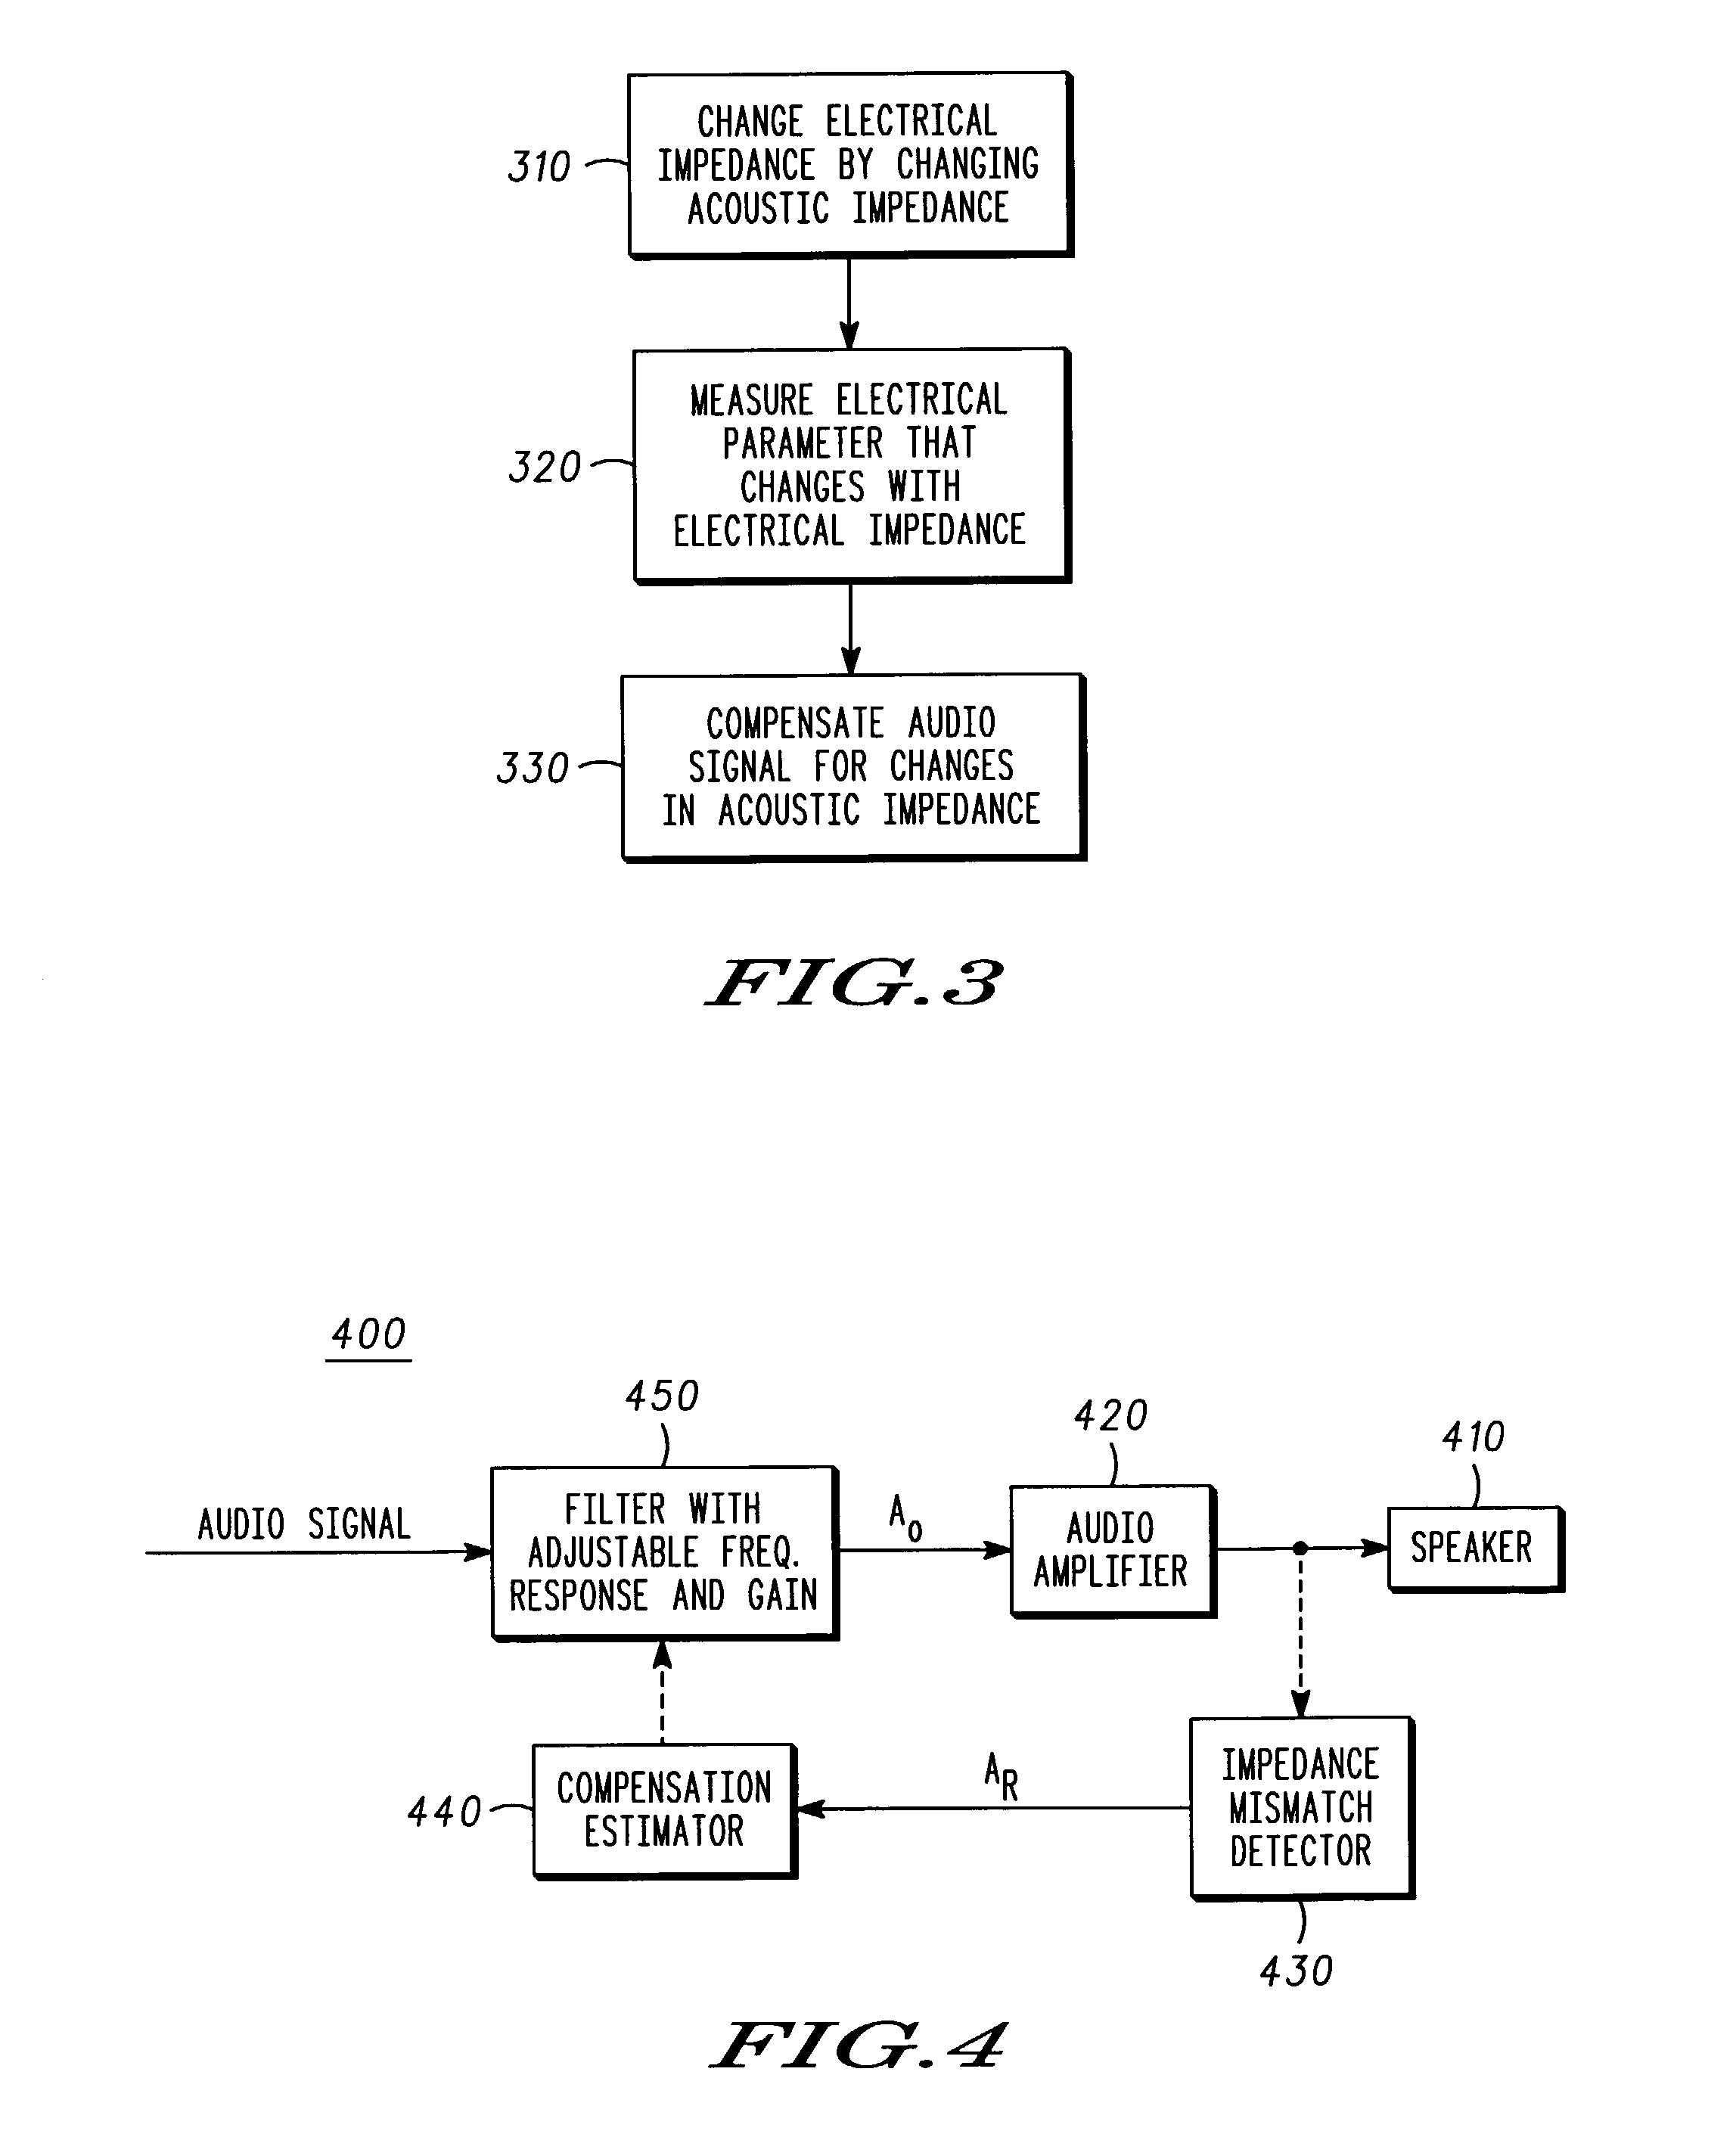 Electrical impedance based audio compensation in audio devices and methods therefor